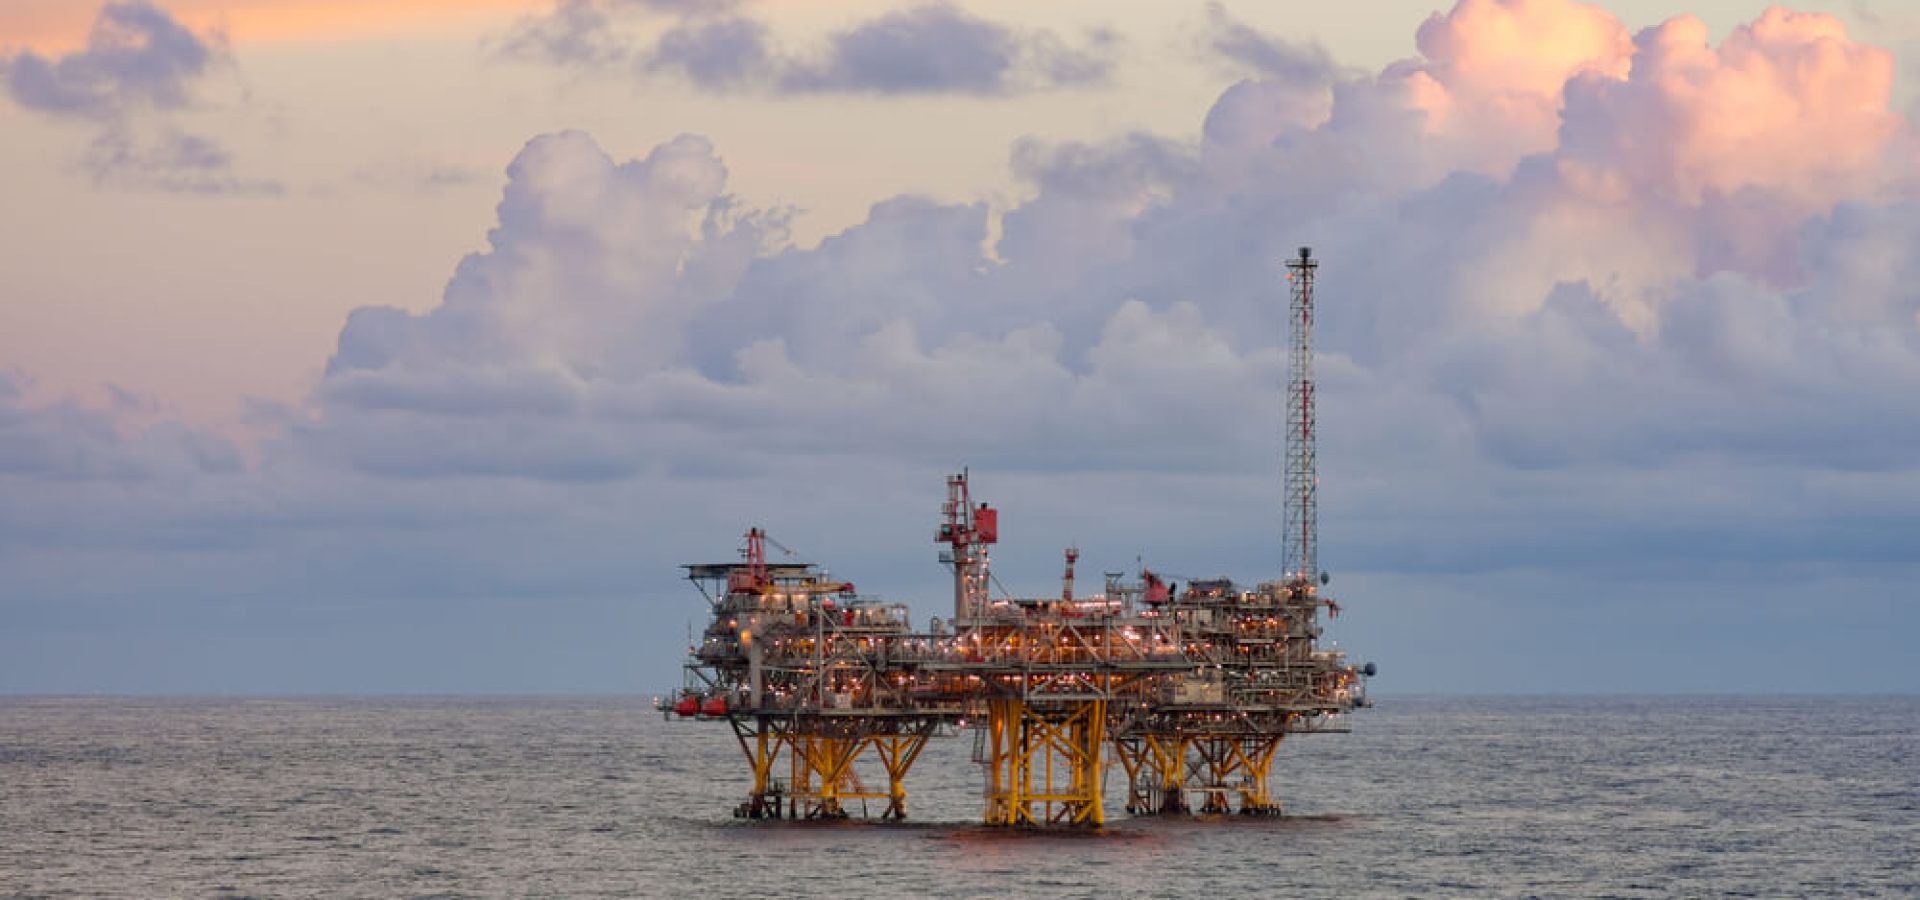 Mexican: Off-shore oil rig in Mexican gulf.